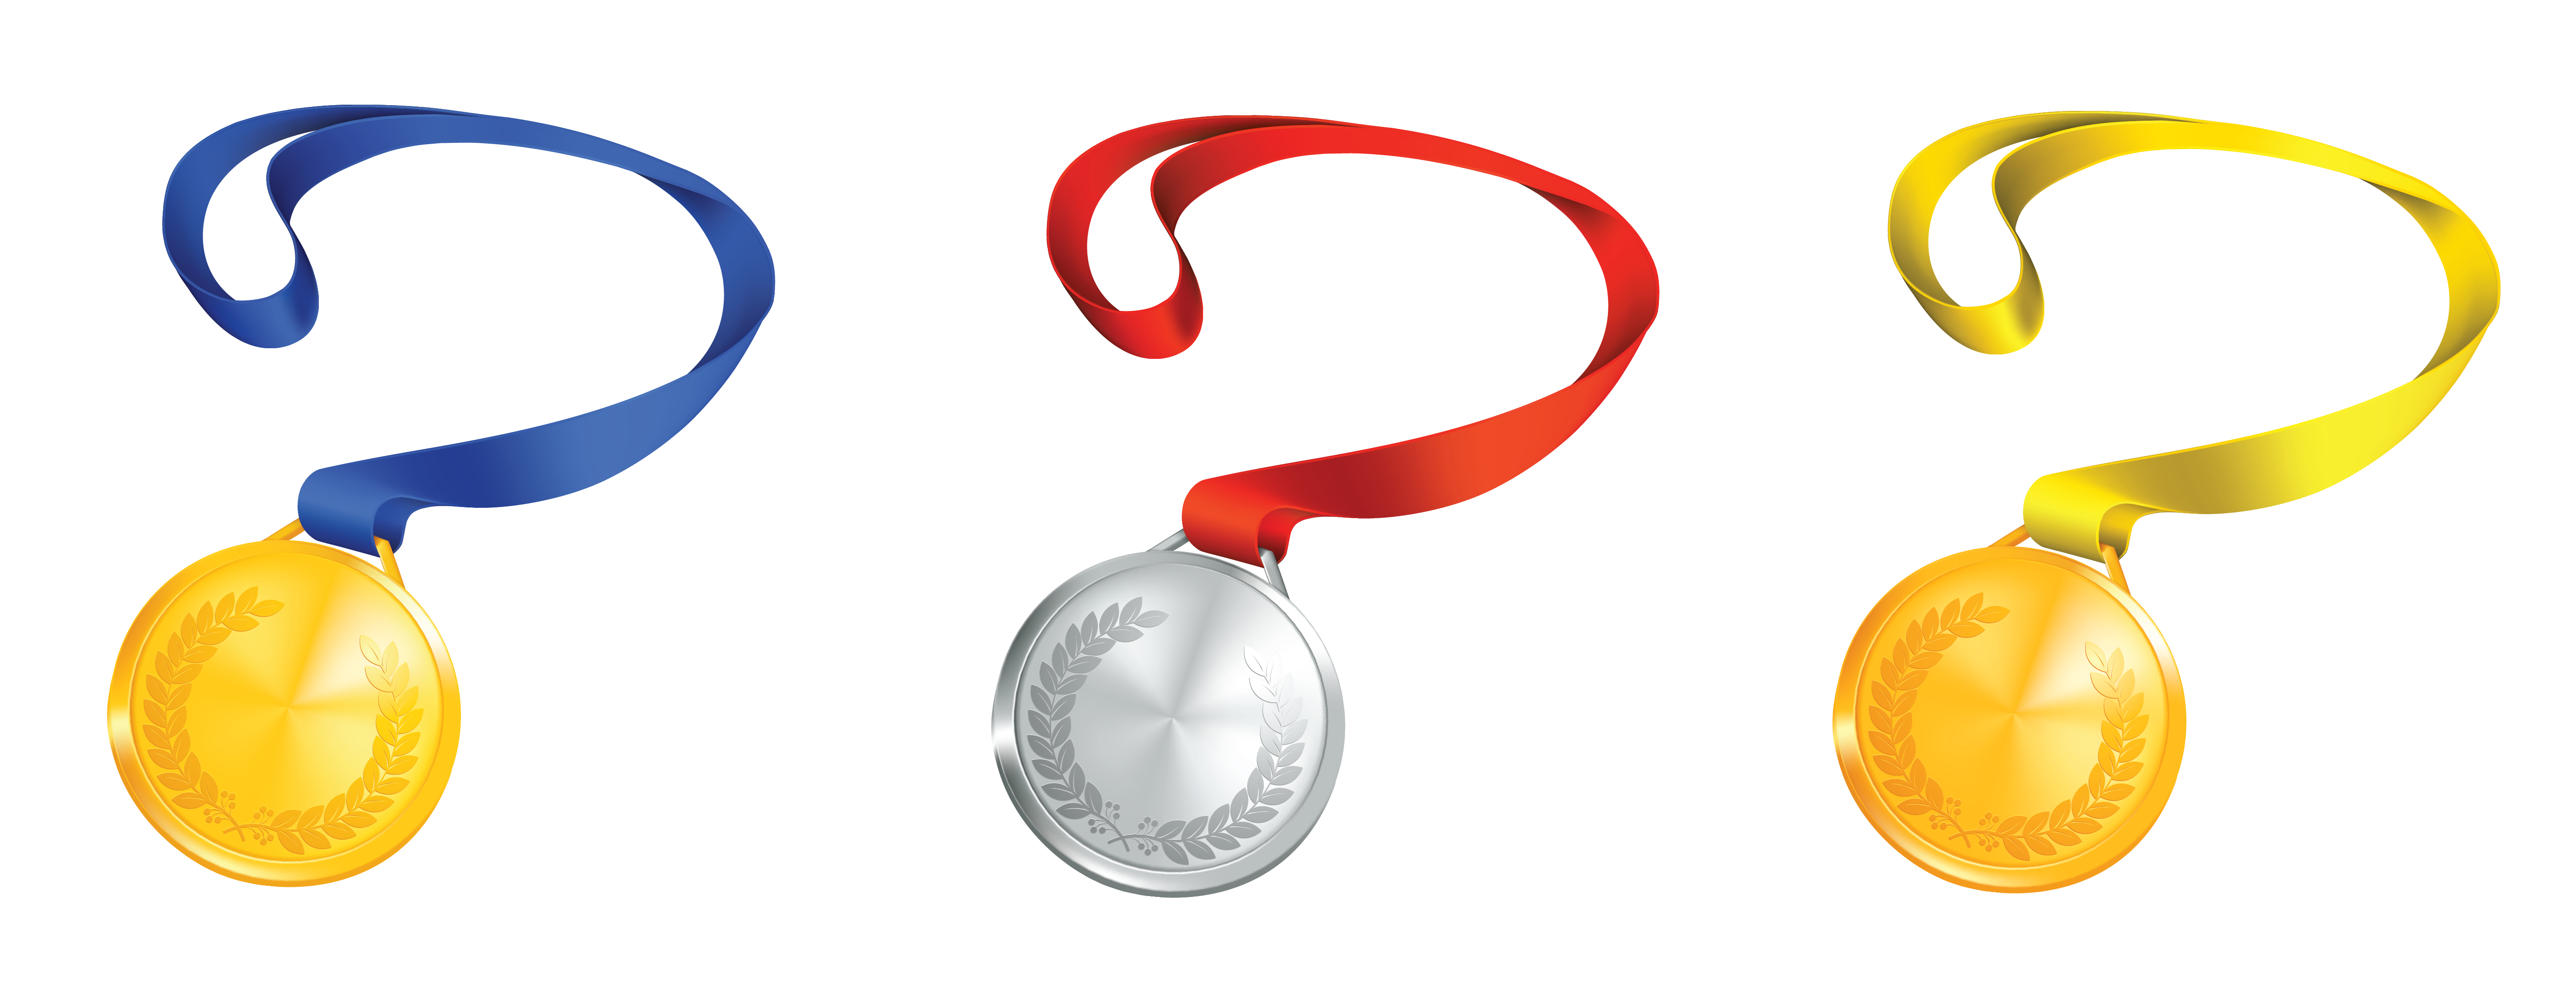 Medal clipart won. Medals set png gallery